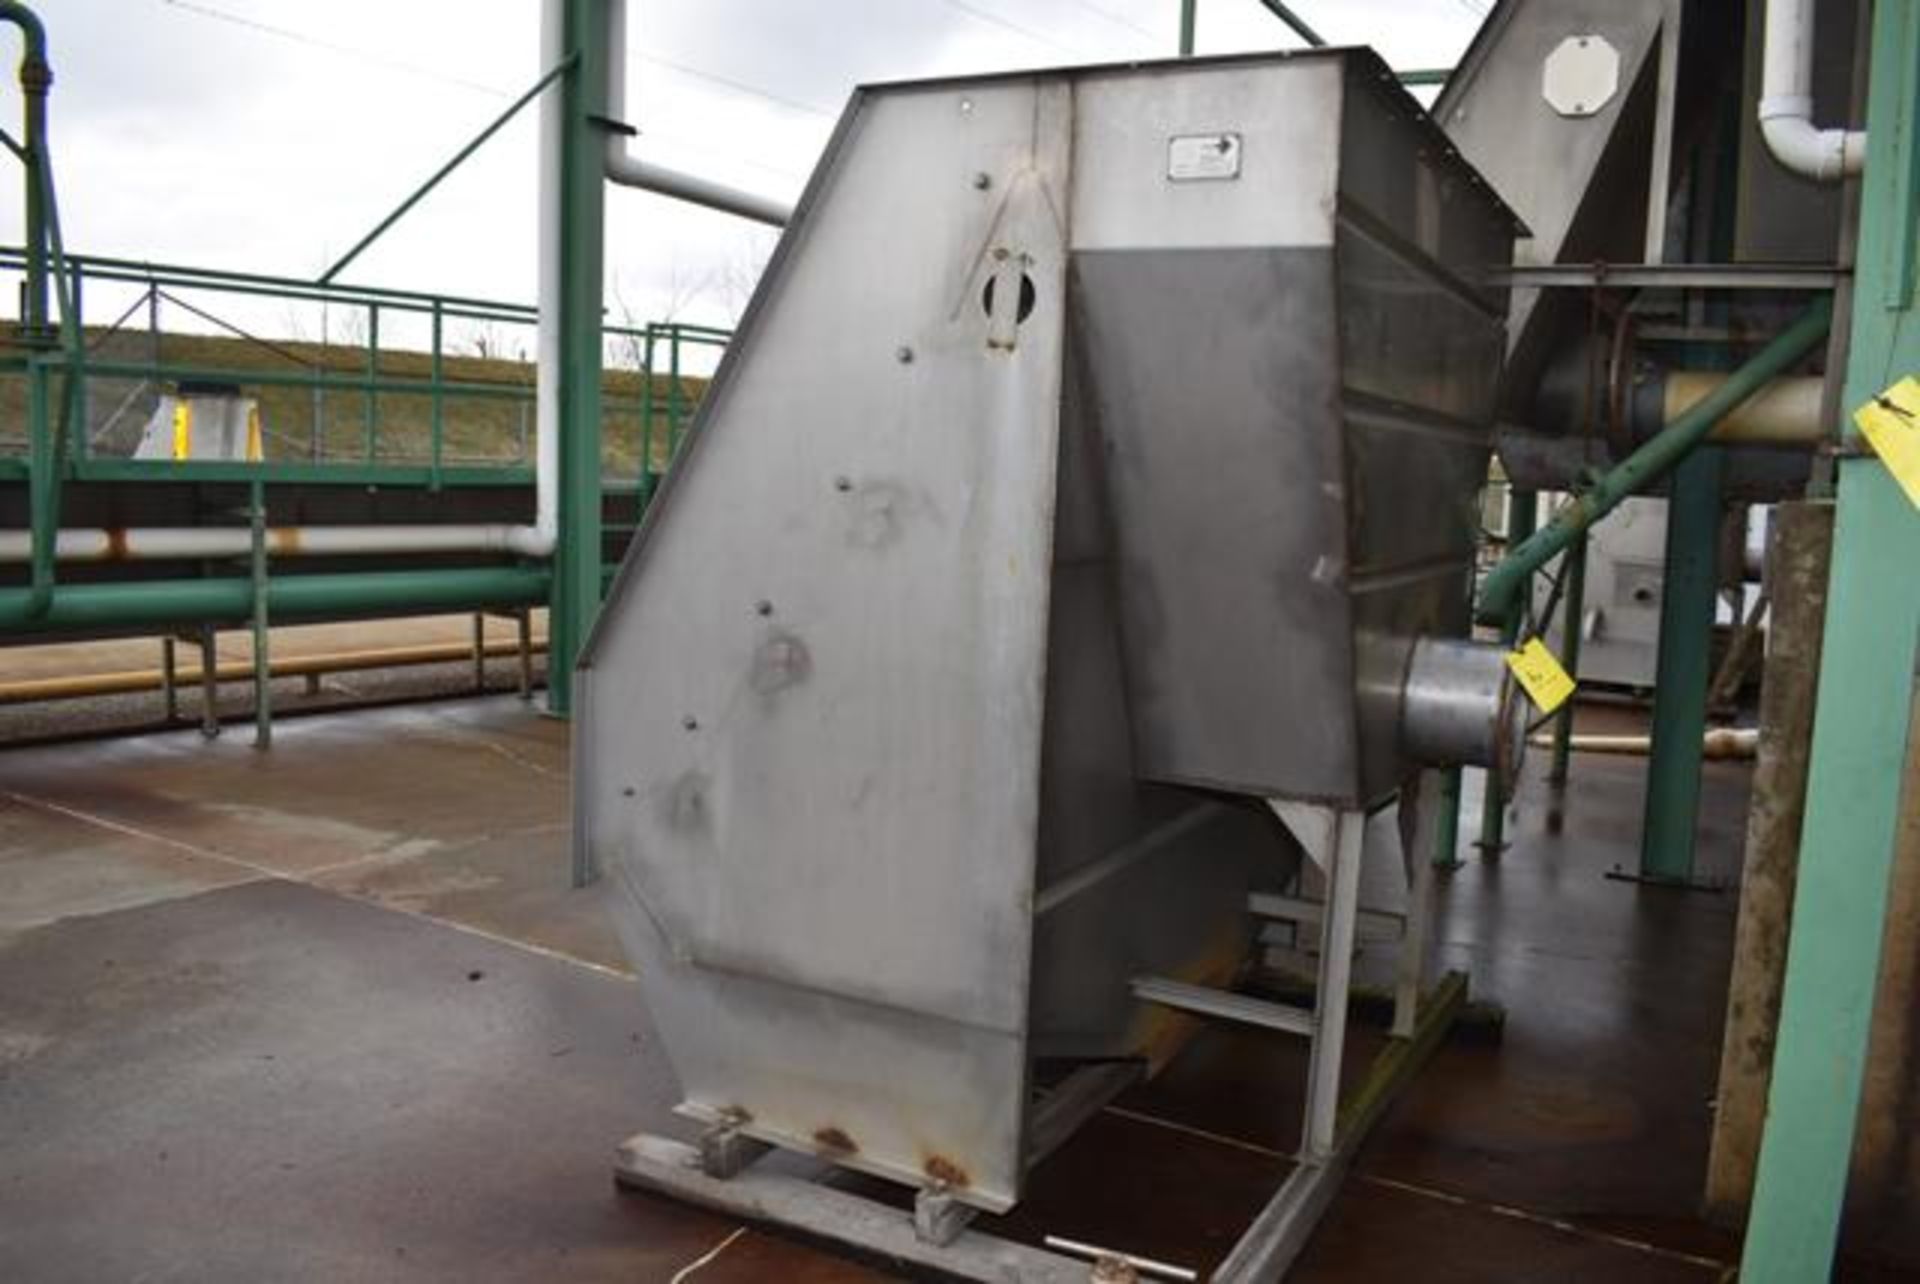 Bauer 72"L x 42"H Hydrasieve, Equipped with Stainless Steel Contacts, Loading Fee: $250 - Image 2 of 3